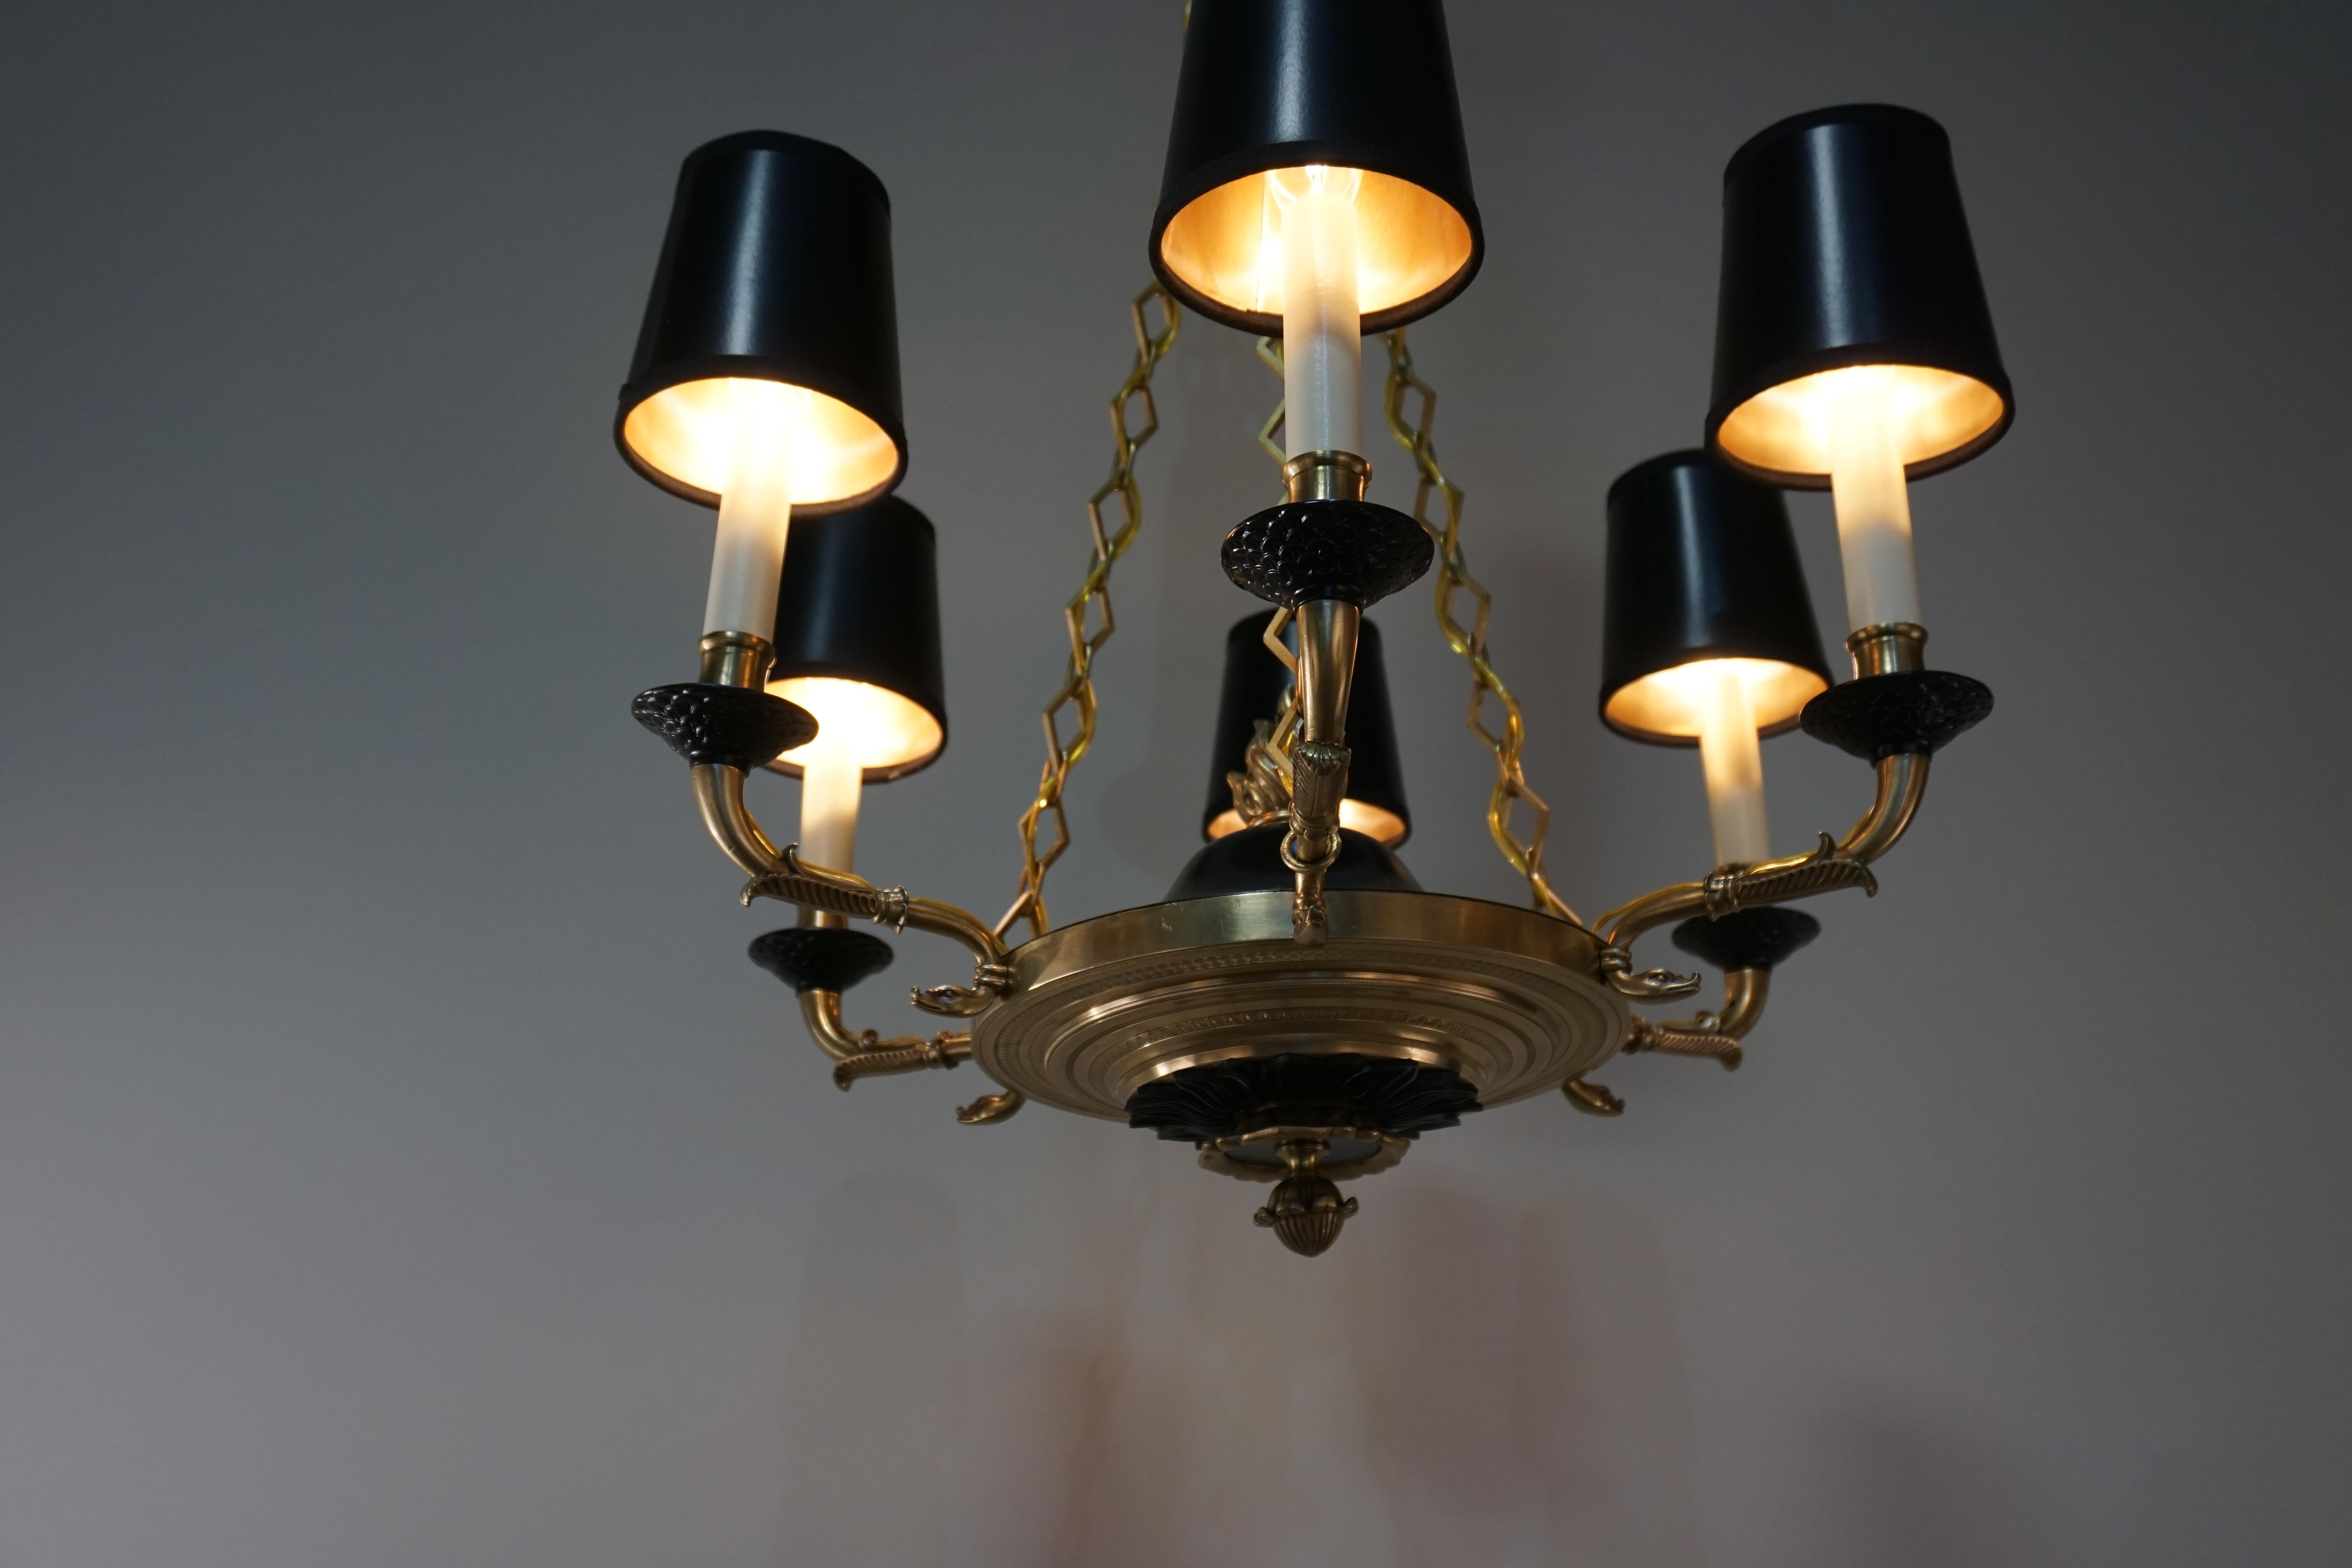 French 1920s empire style six-light bronze and black lacquer on bronze chandelier.